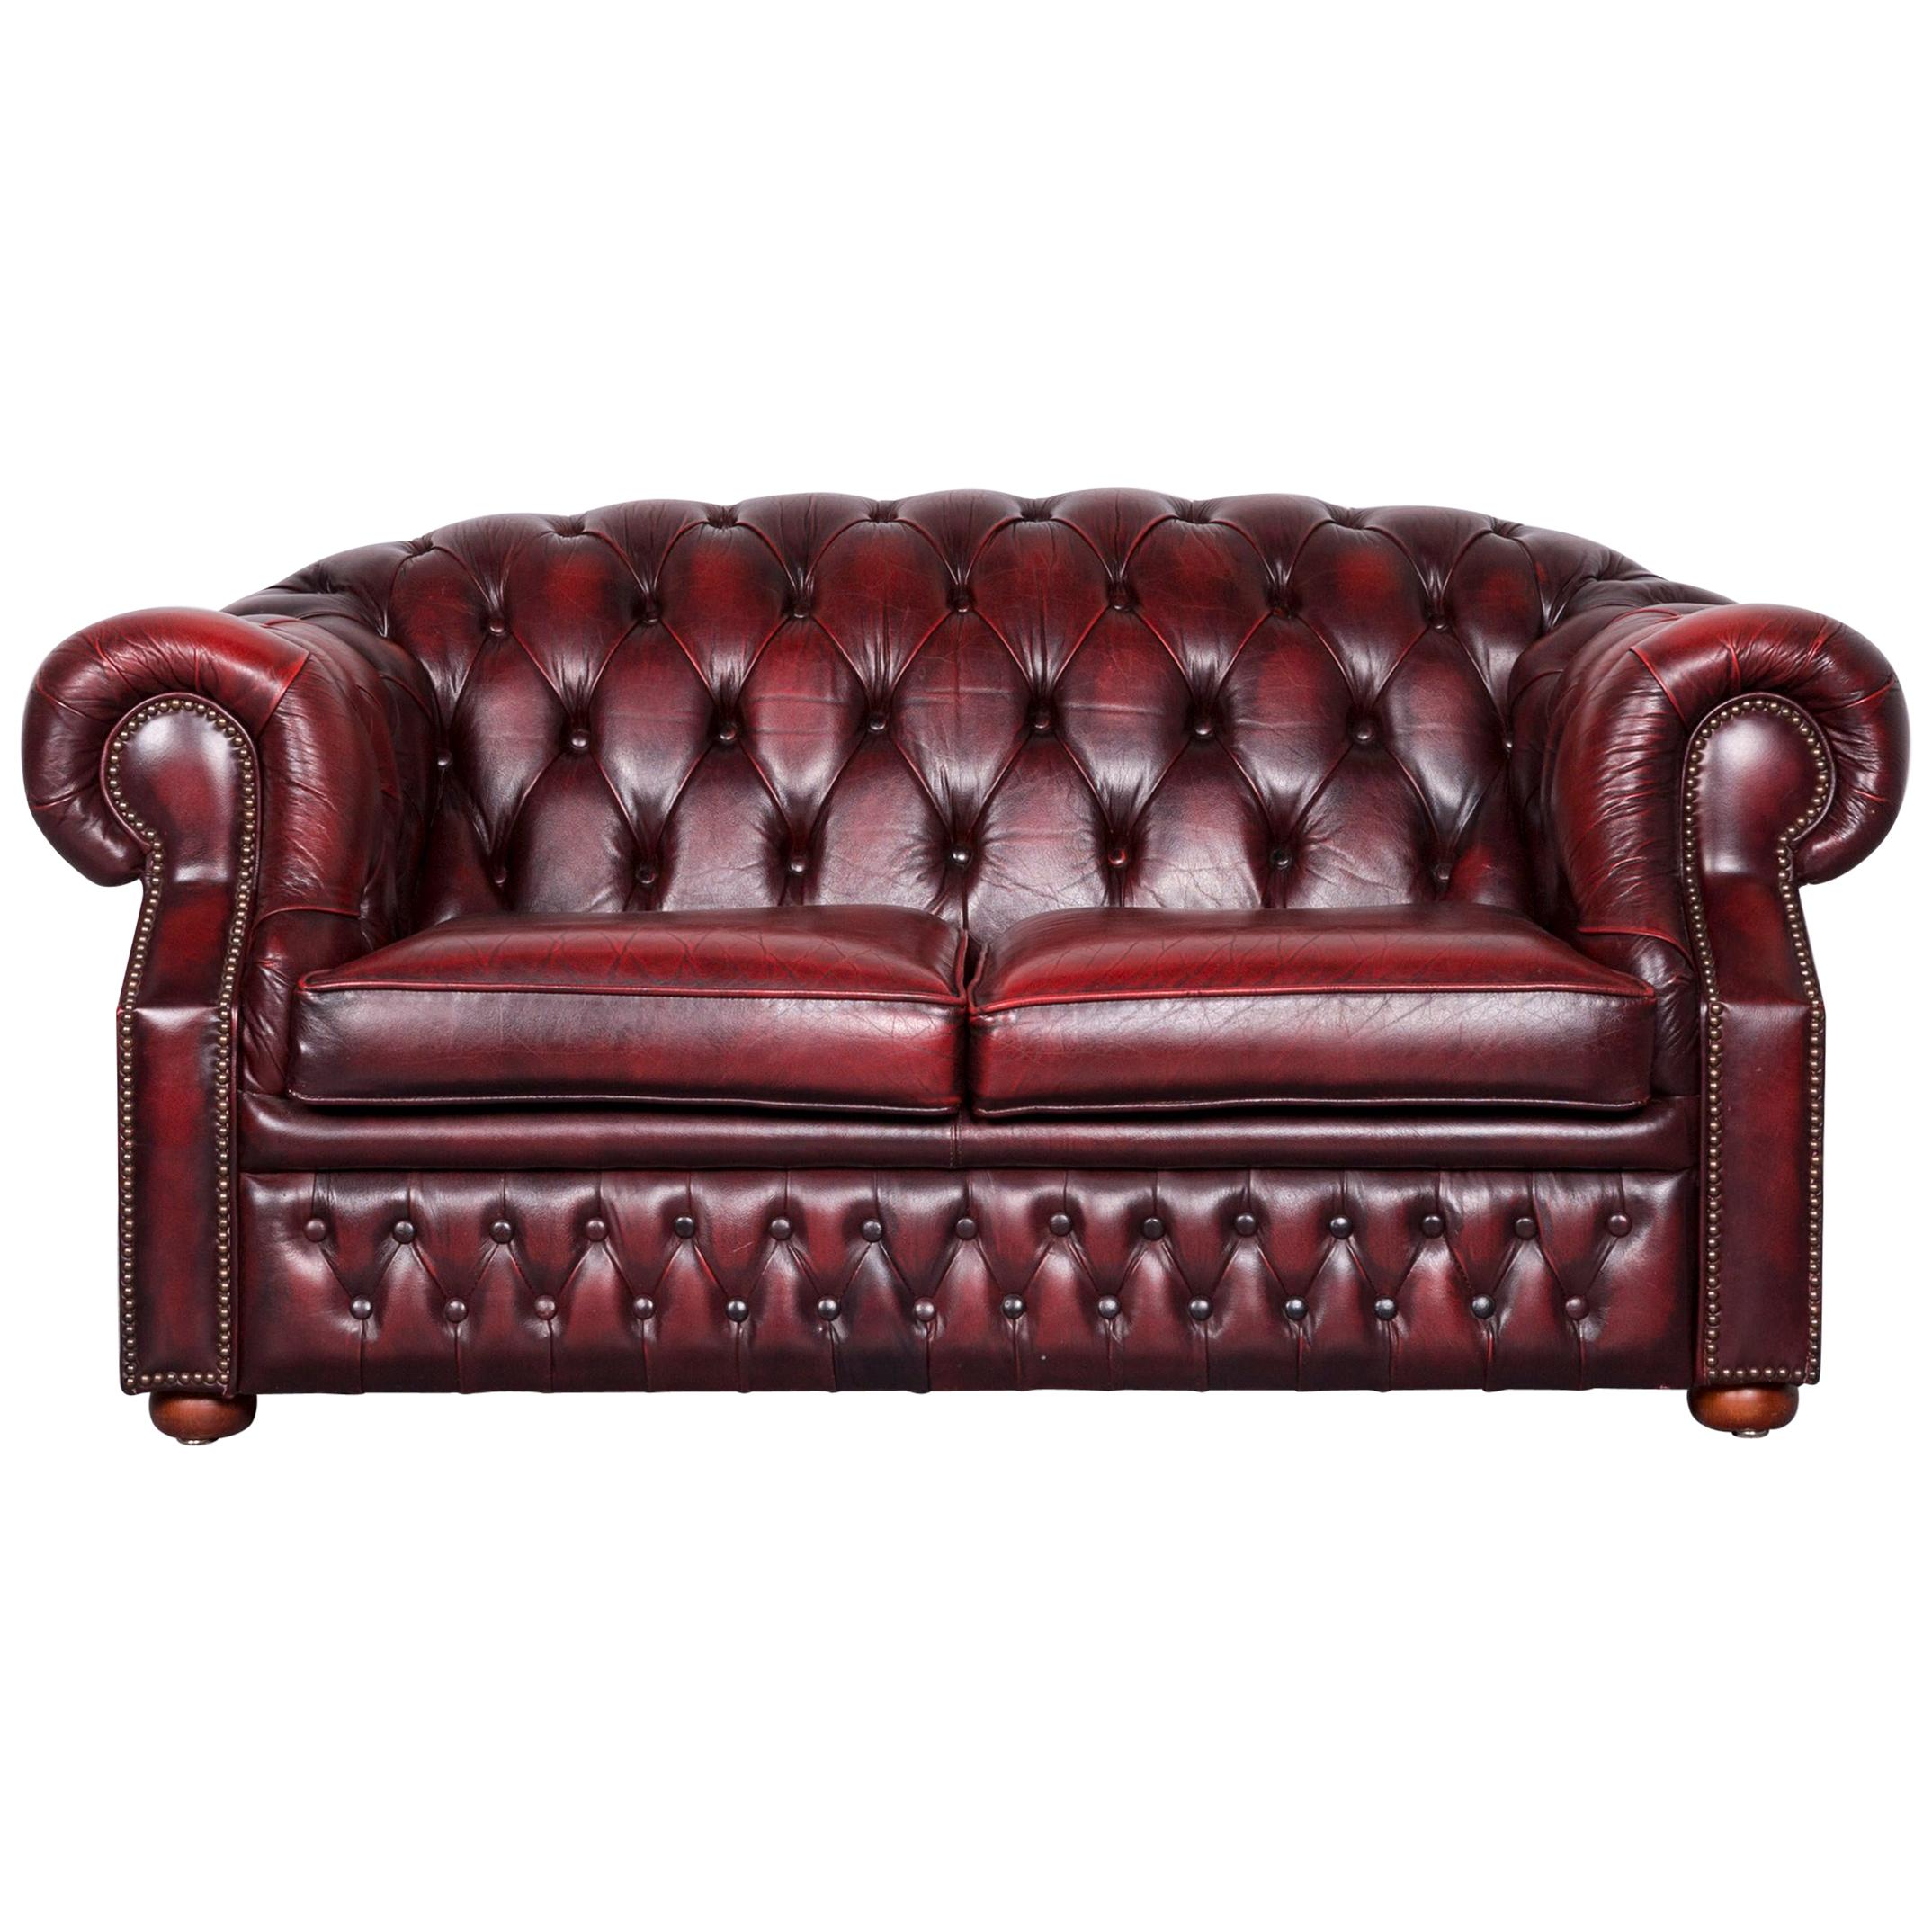 Chesterfield Centurion Leather Sofa Red Two-Seat Vintage Couch